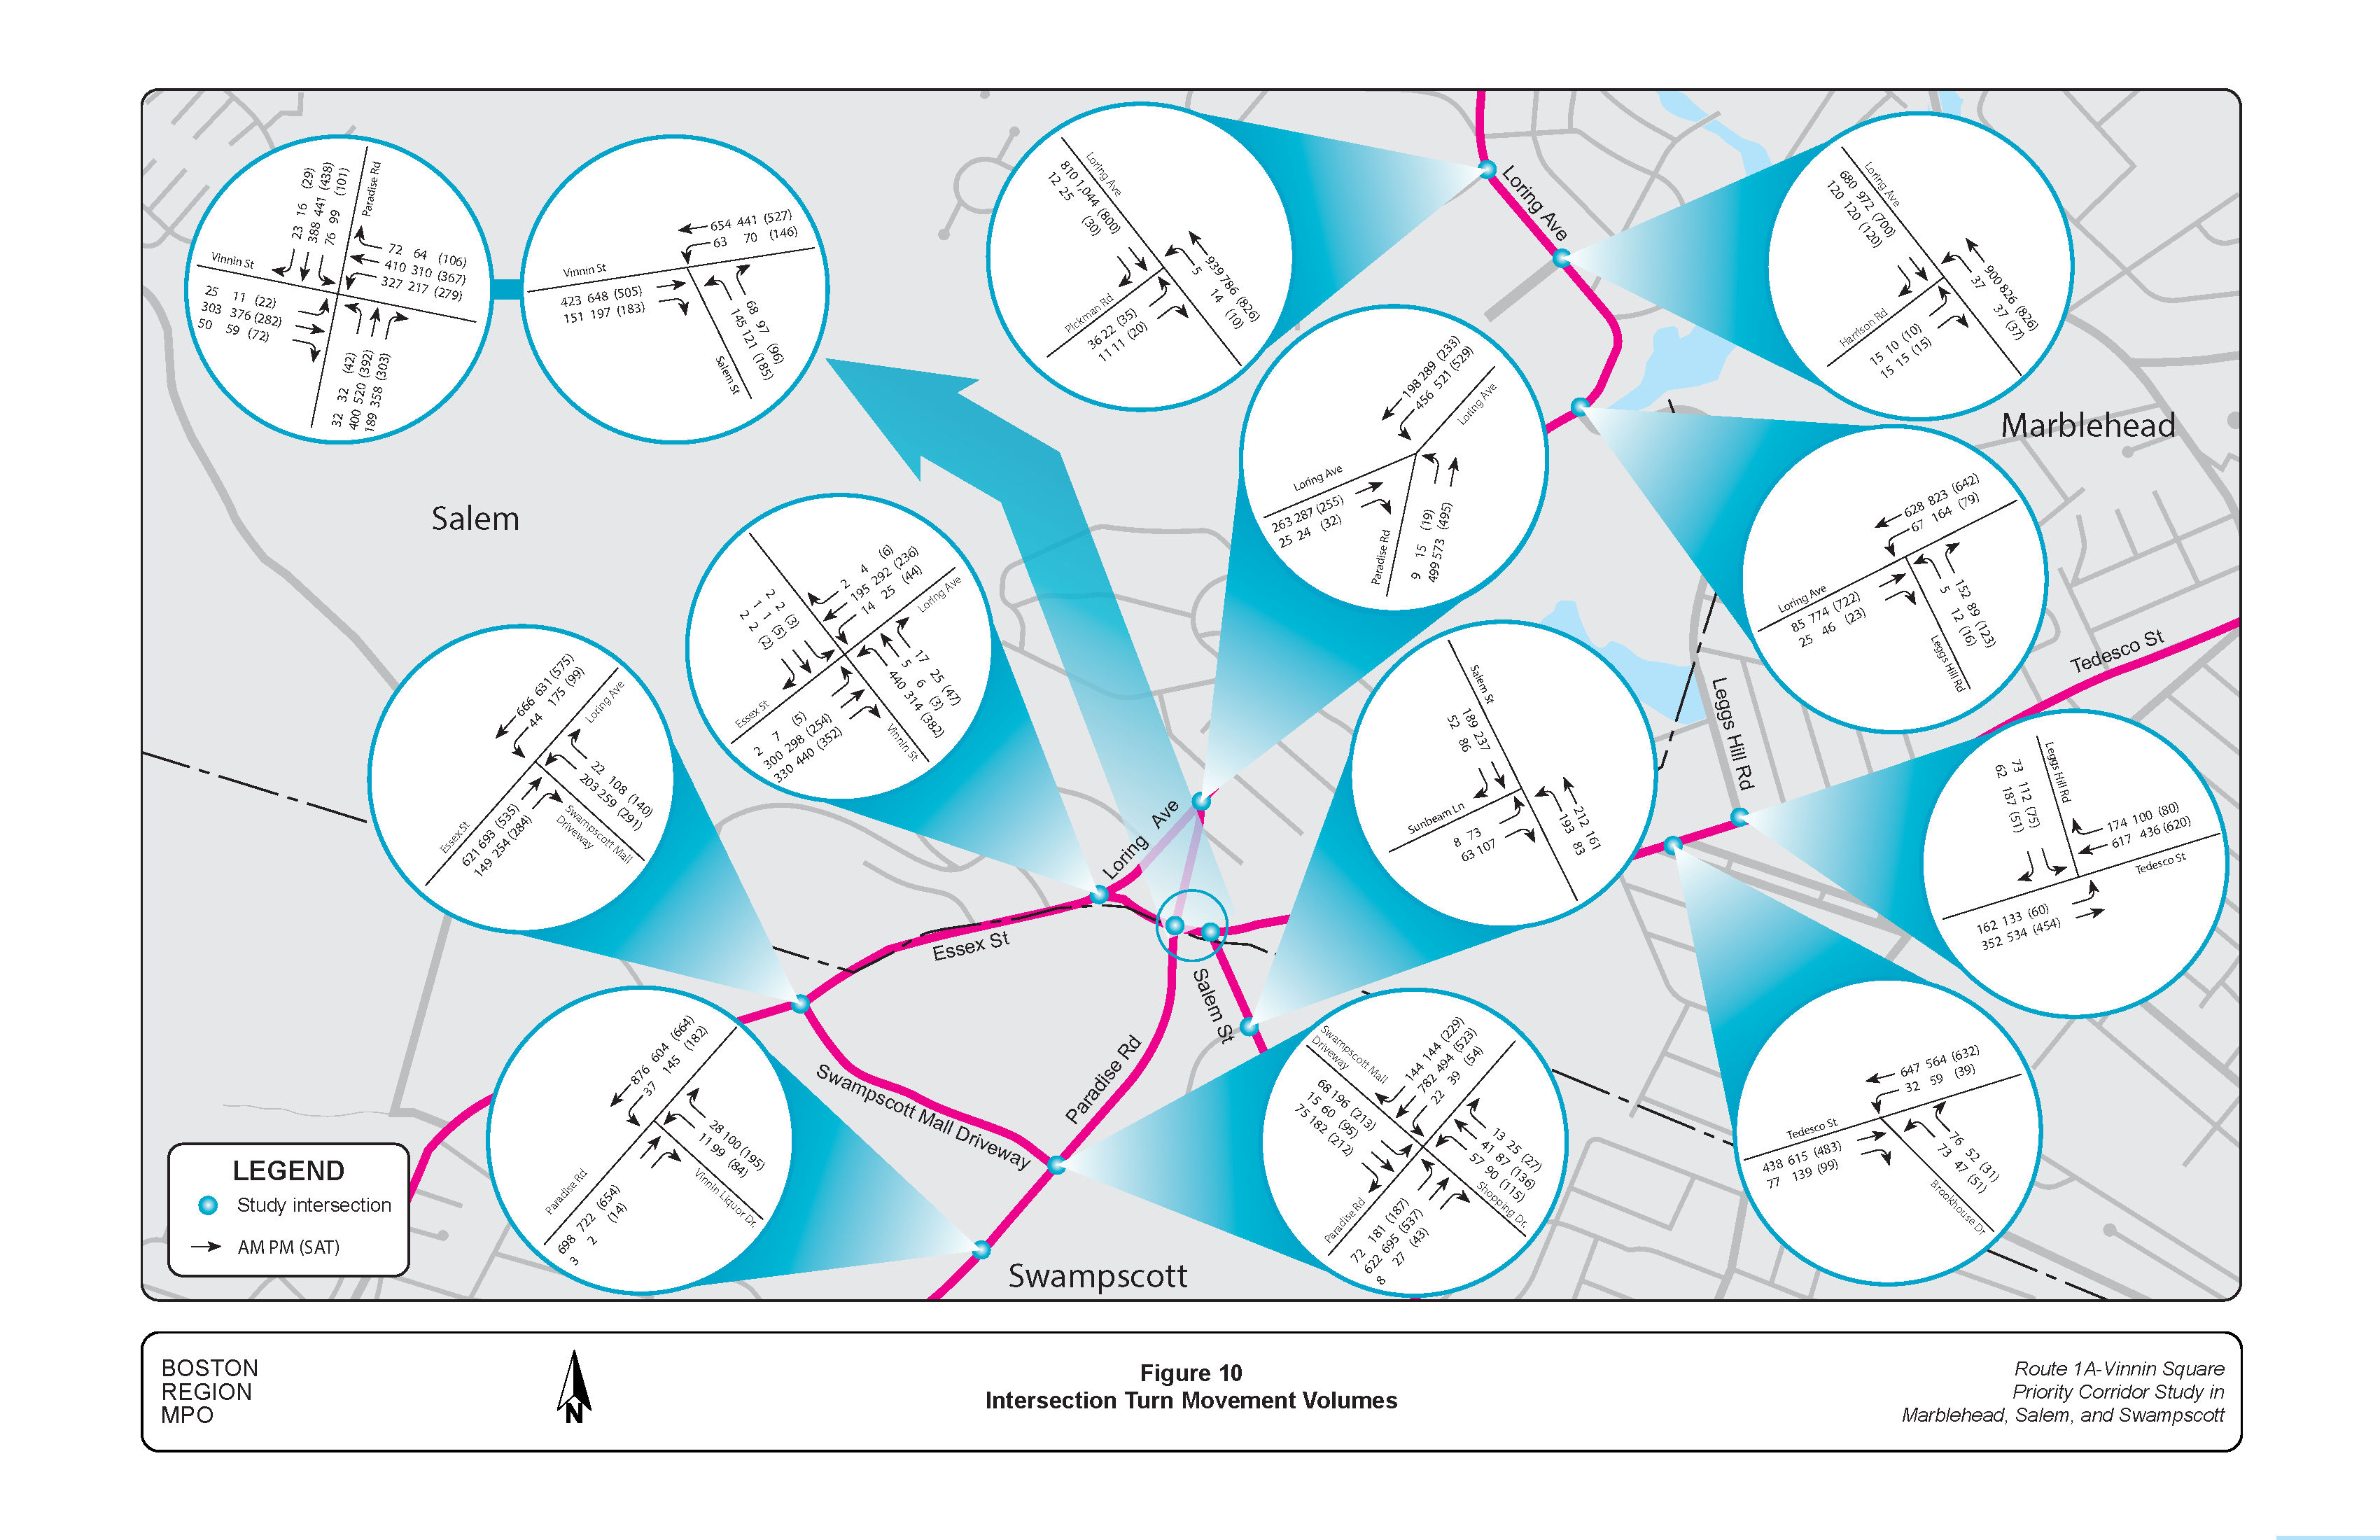 FIGURE 10. Intersection Turn Movement Volumes.Figure 10 is a map of roadways in the study area showing data on vehicle turn-movement volumes at various intersections.